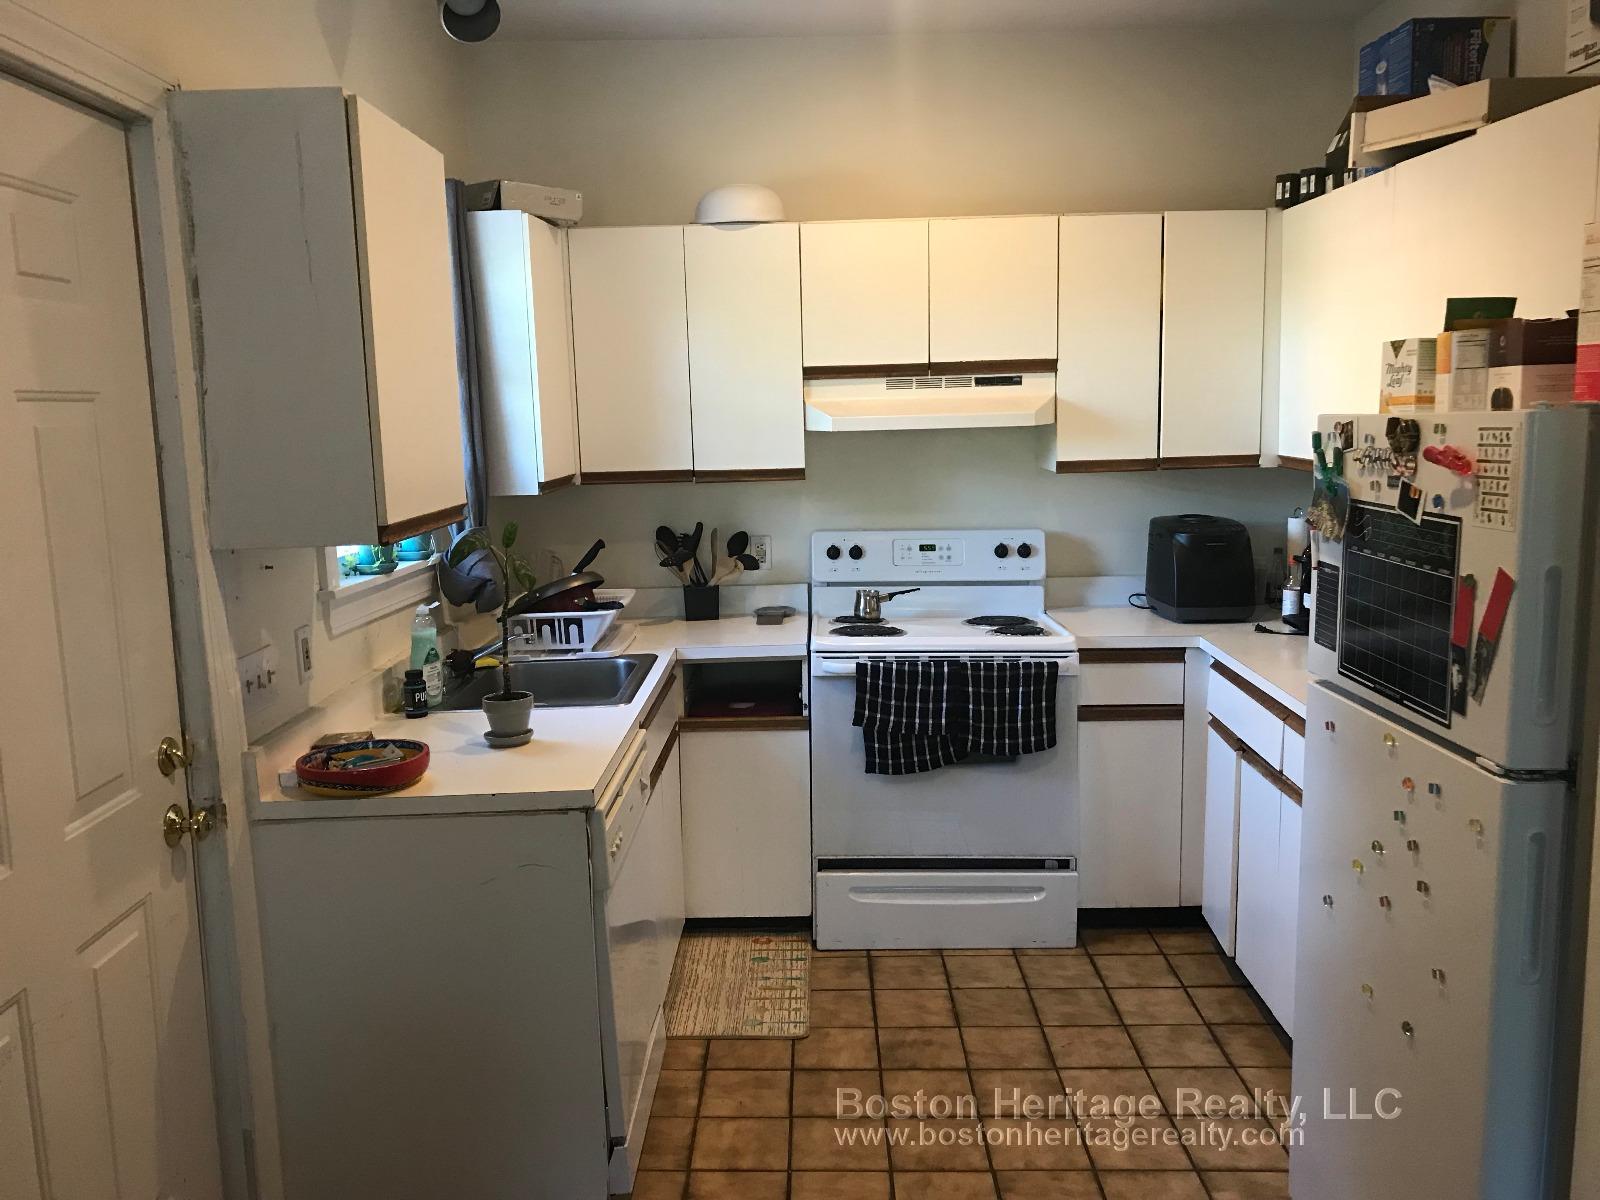 1 Bed, 1 Bath apartment in Boston, Mission Hill for $1,950